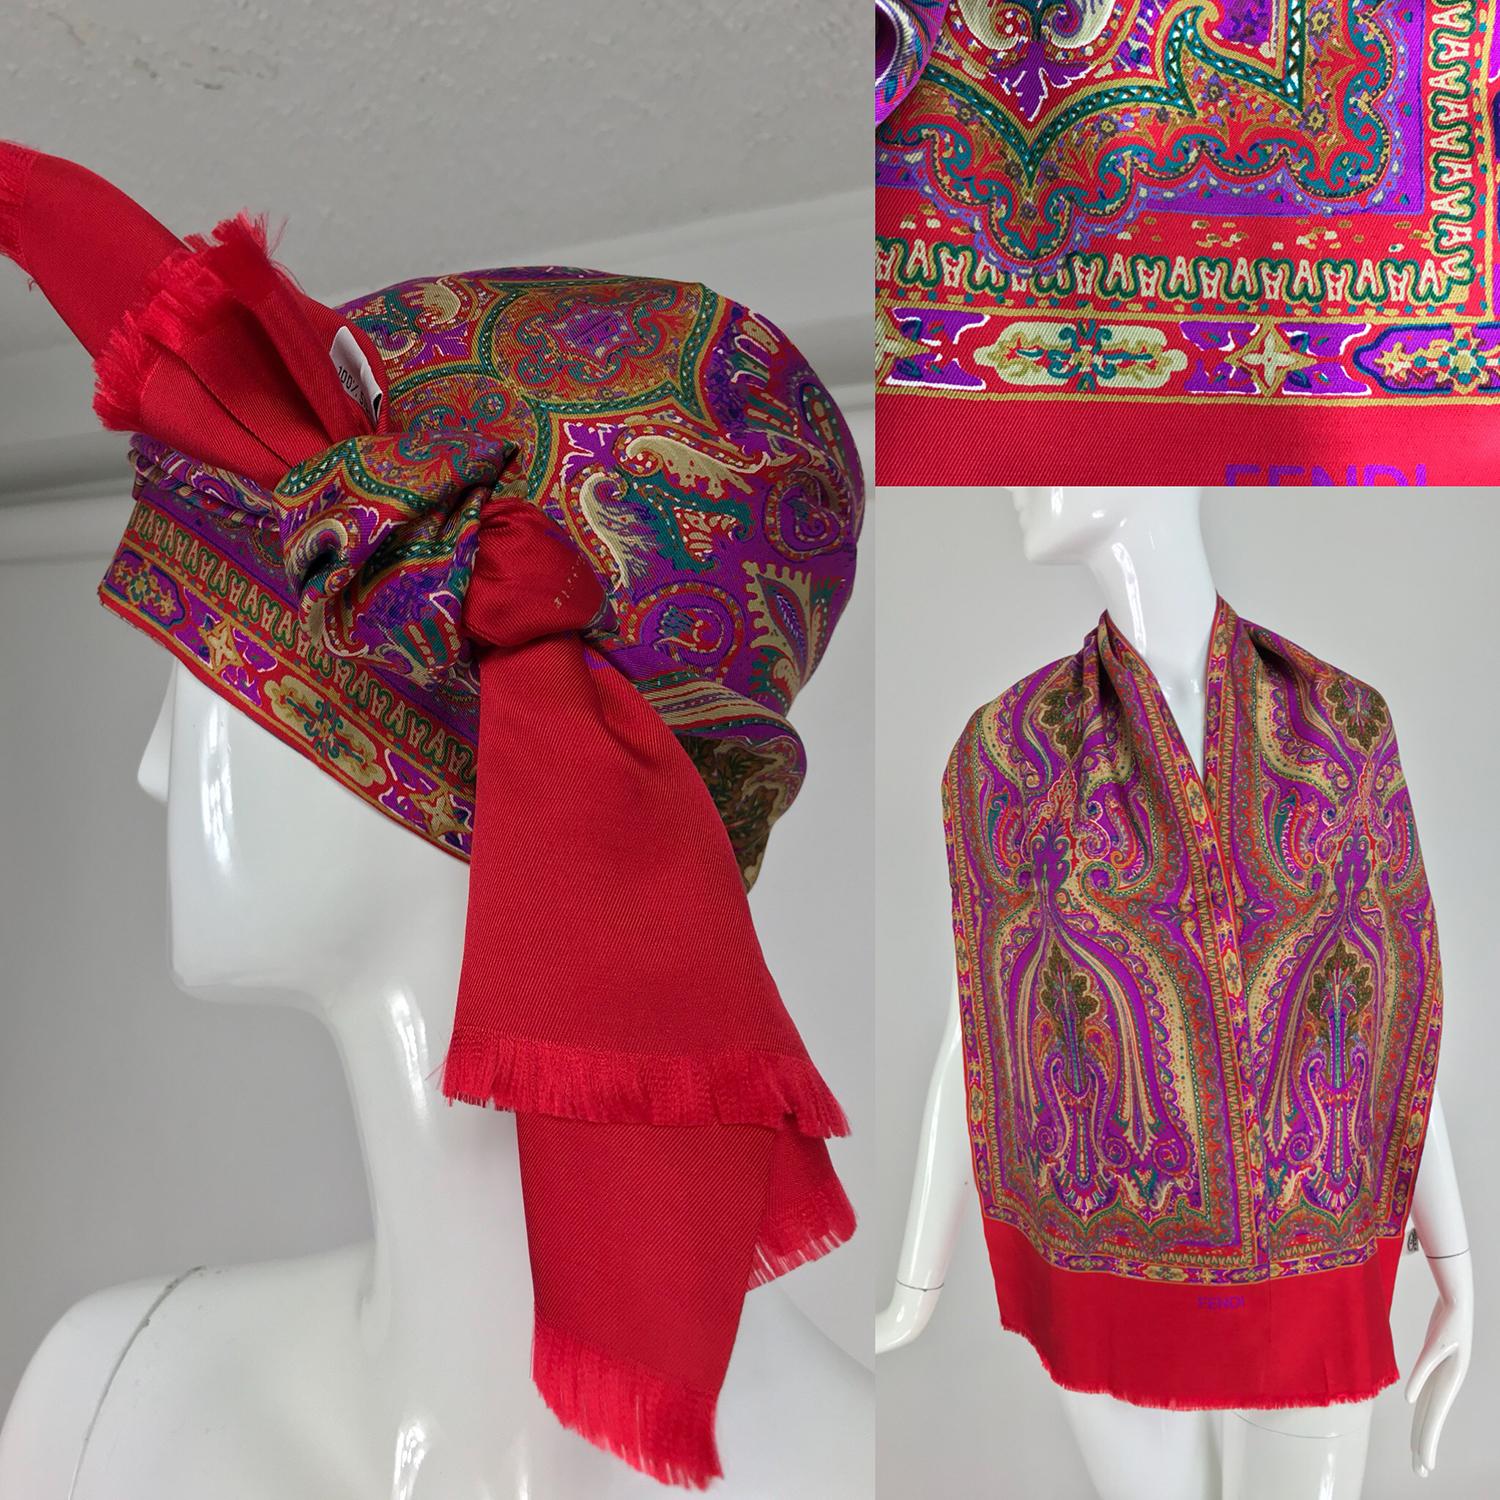 Fendi paisley silk oblong scarf in reds and fuchsia. This beautiful scarf is long and wide and is double with a side seam and self fringe at either end. Looks barely worn. There is a little bit of over printing, looks like a fine dash of gold, see